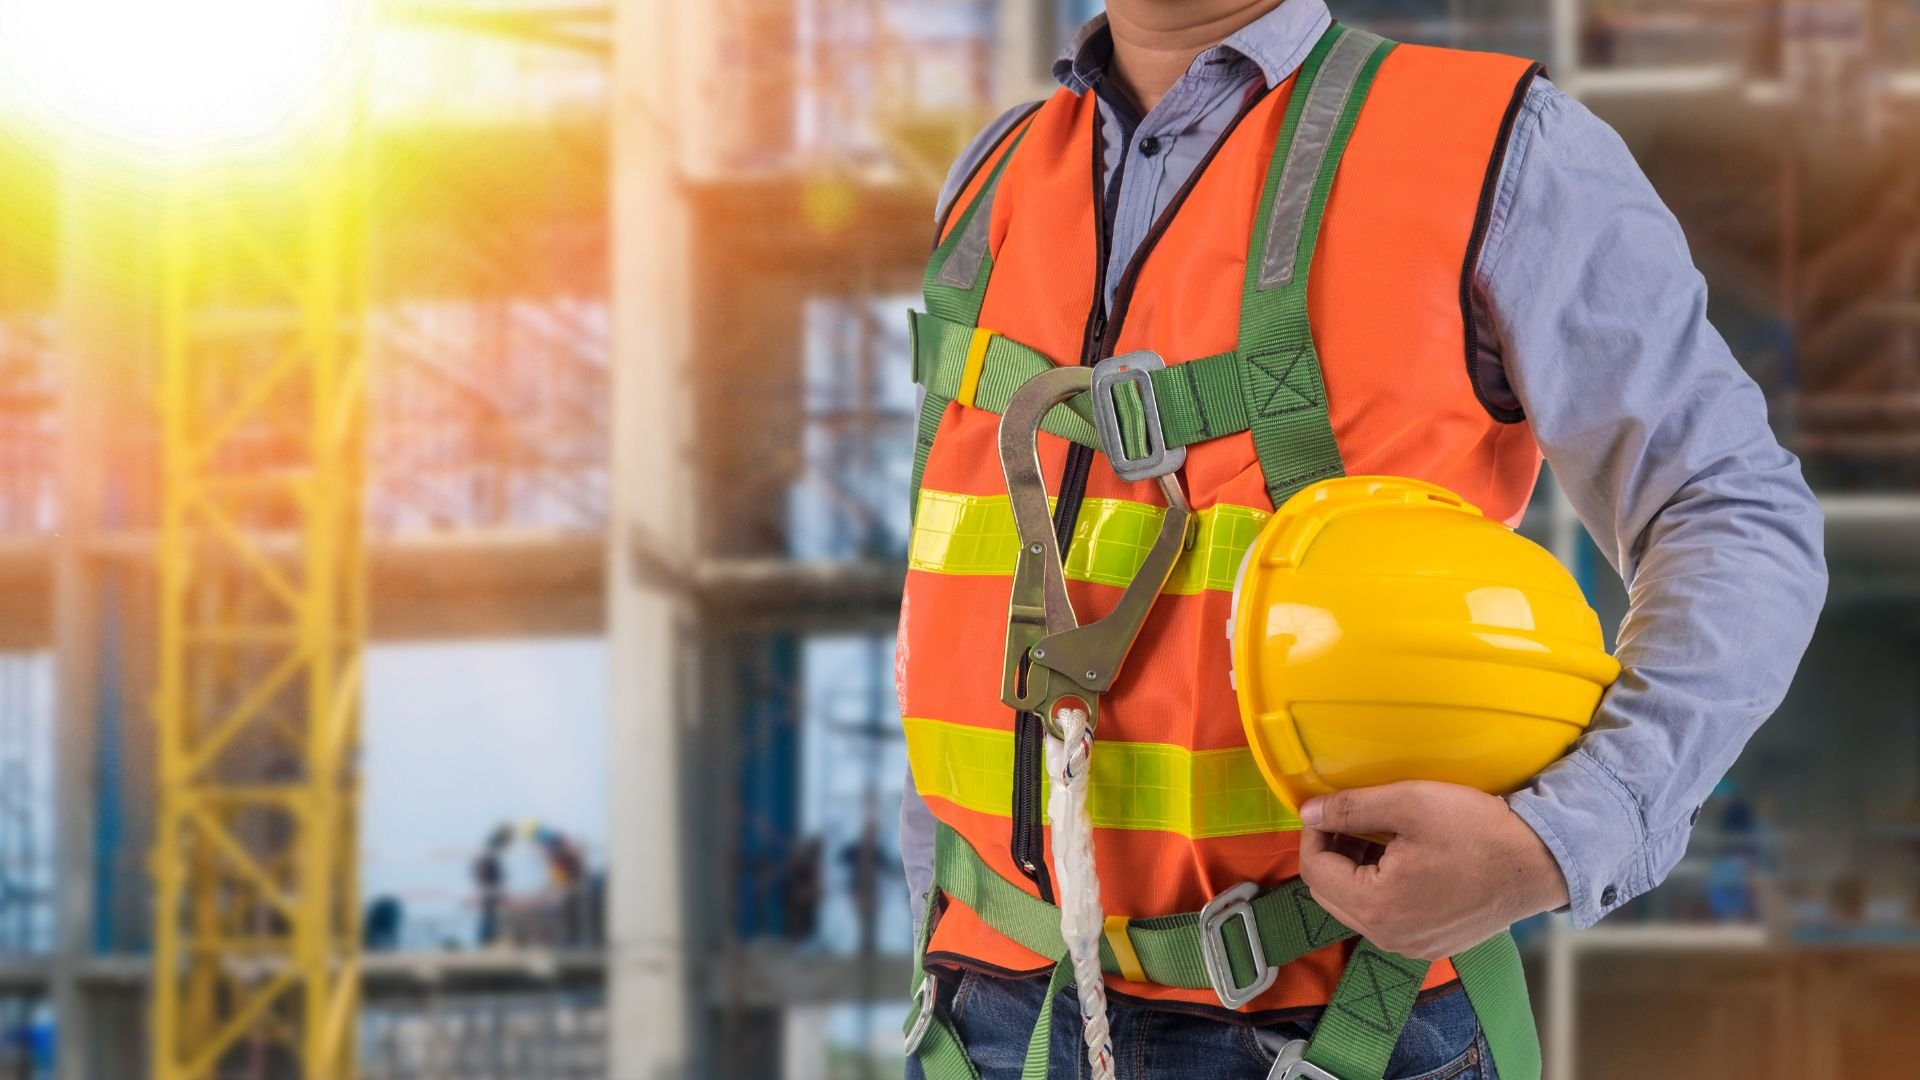 Safety Audit and Fall Risk Assessment for Employees